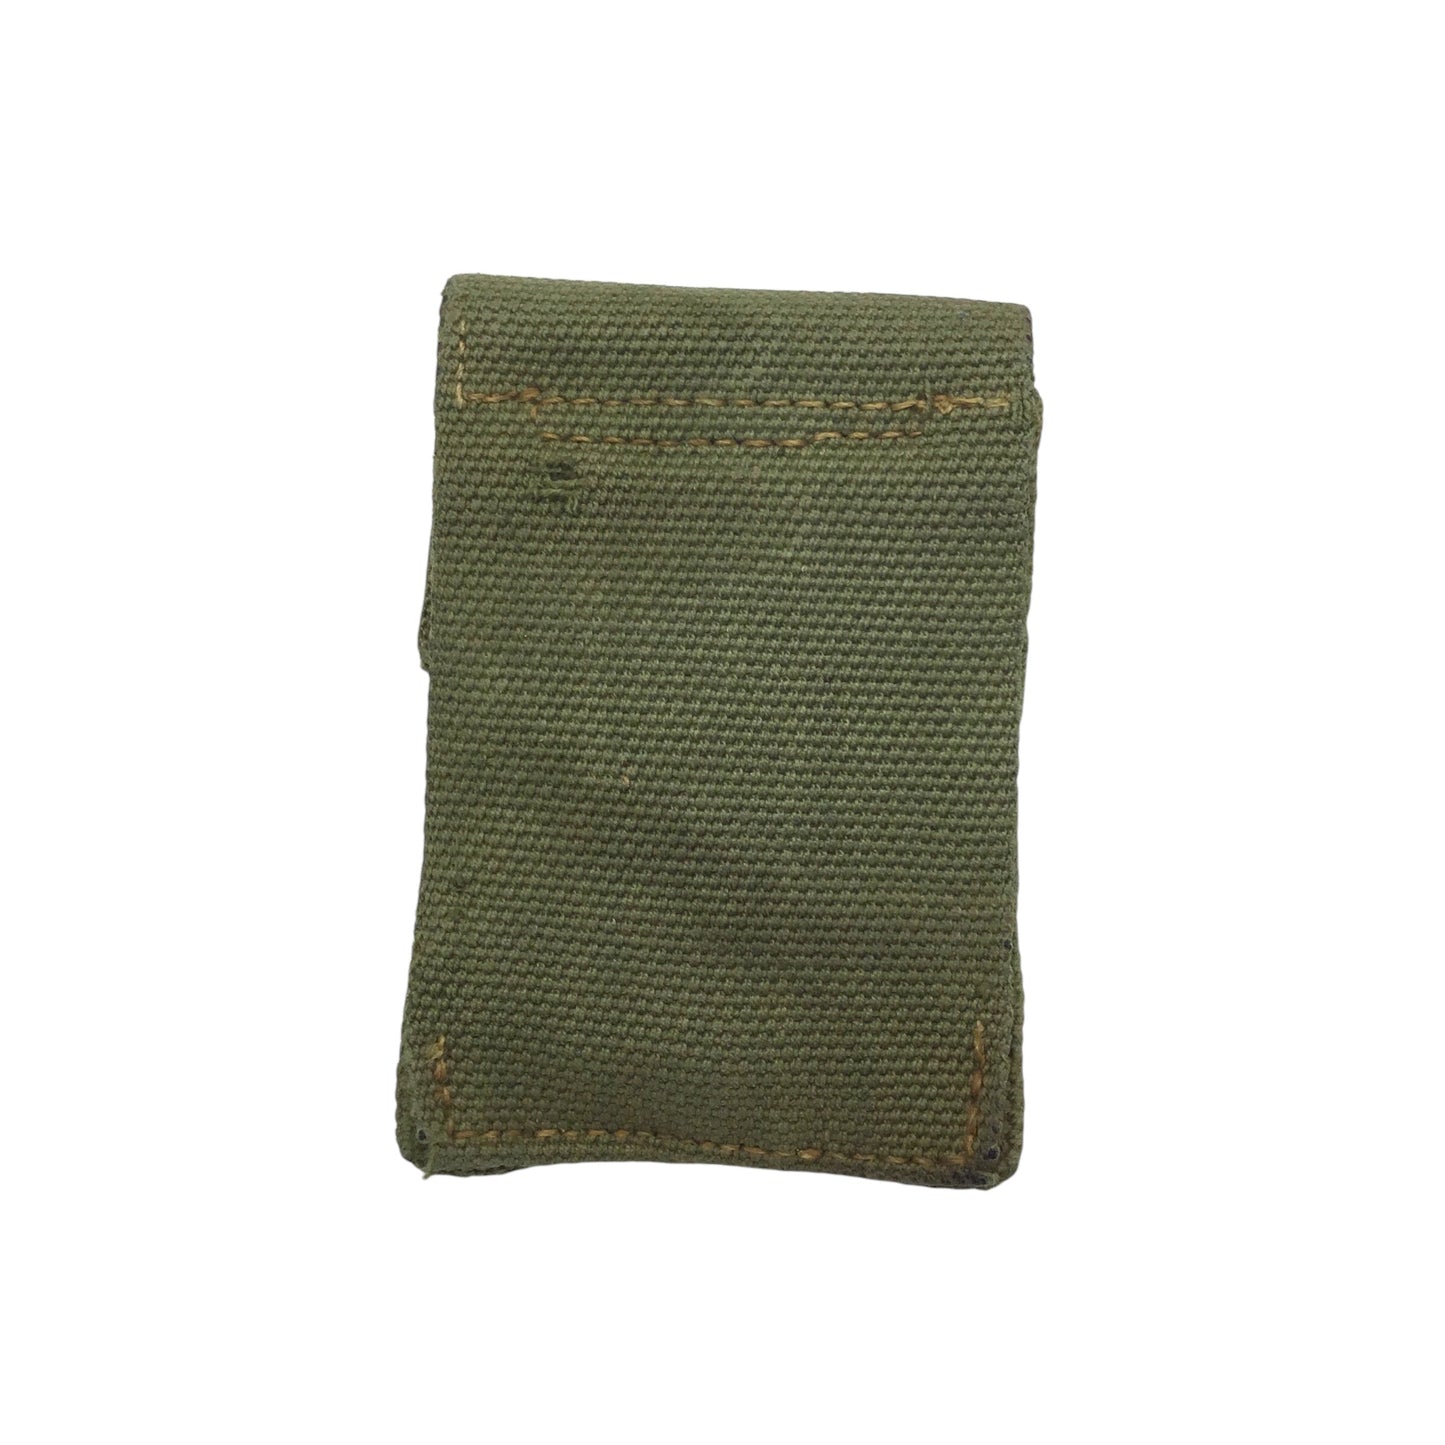 US Unissued Single Small Pouch - 1916 Pre-WW1 Mills Army Eagle Snap